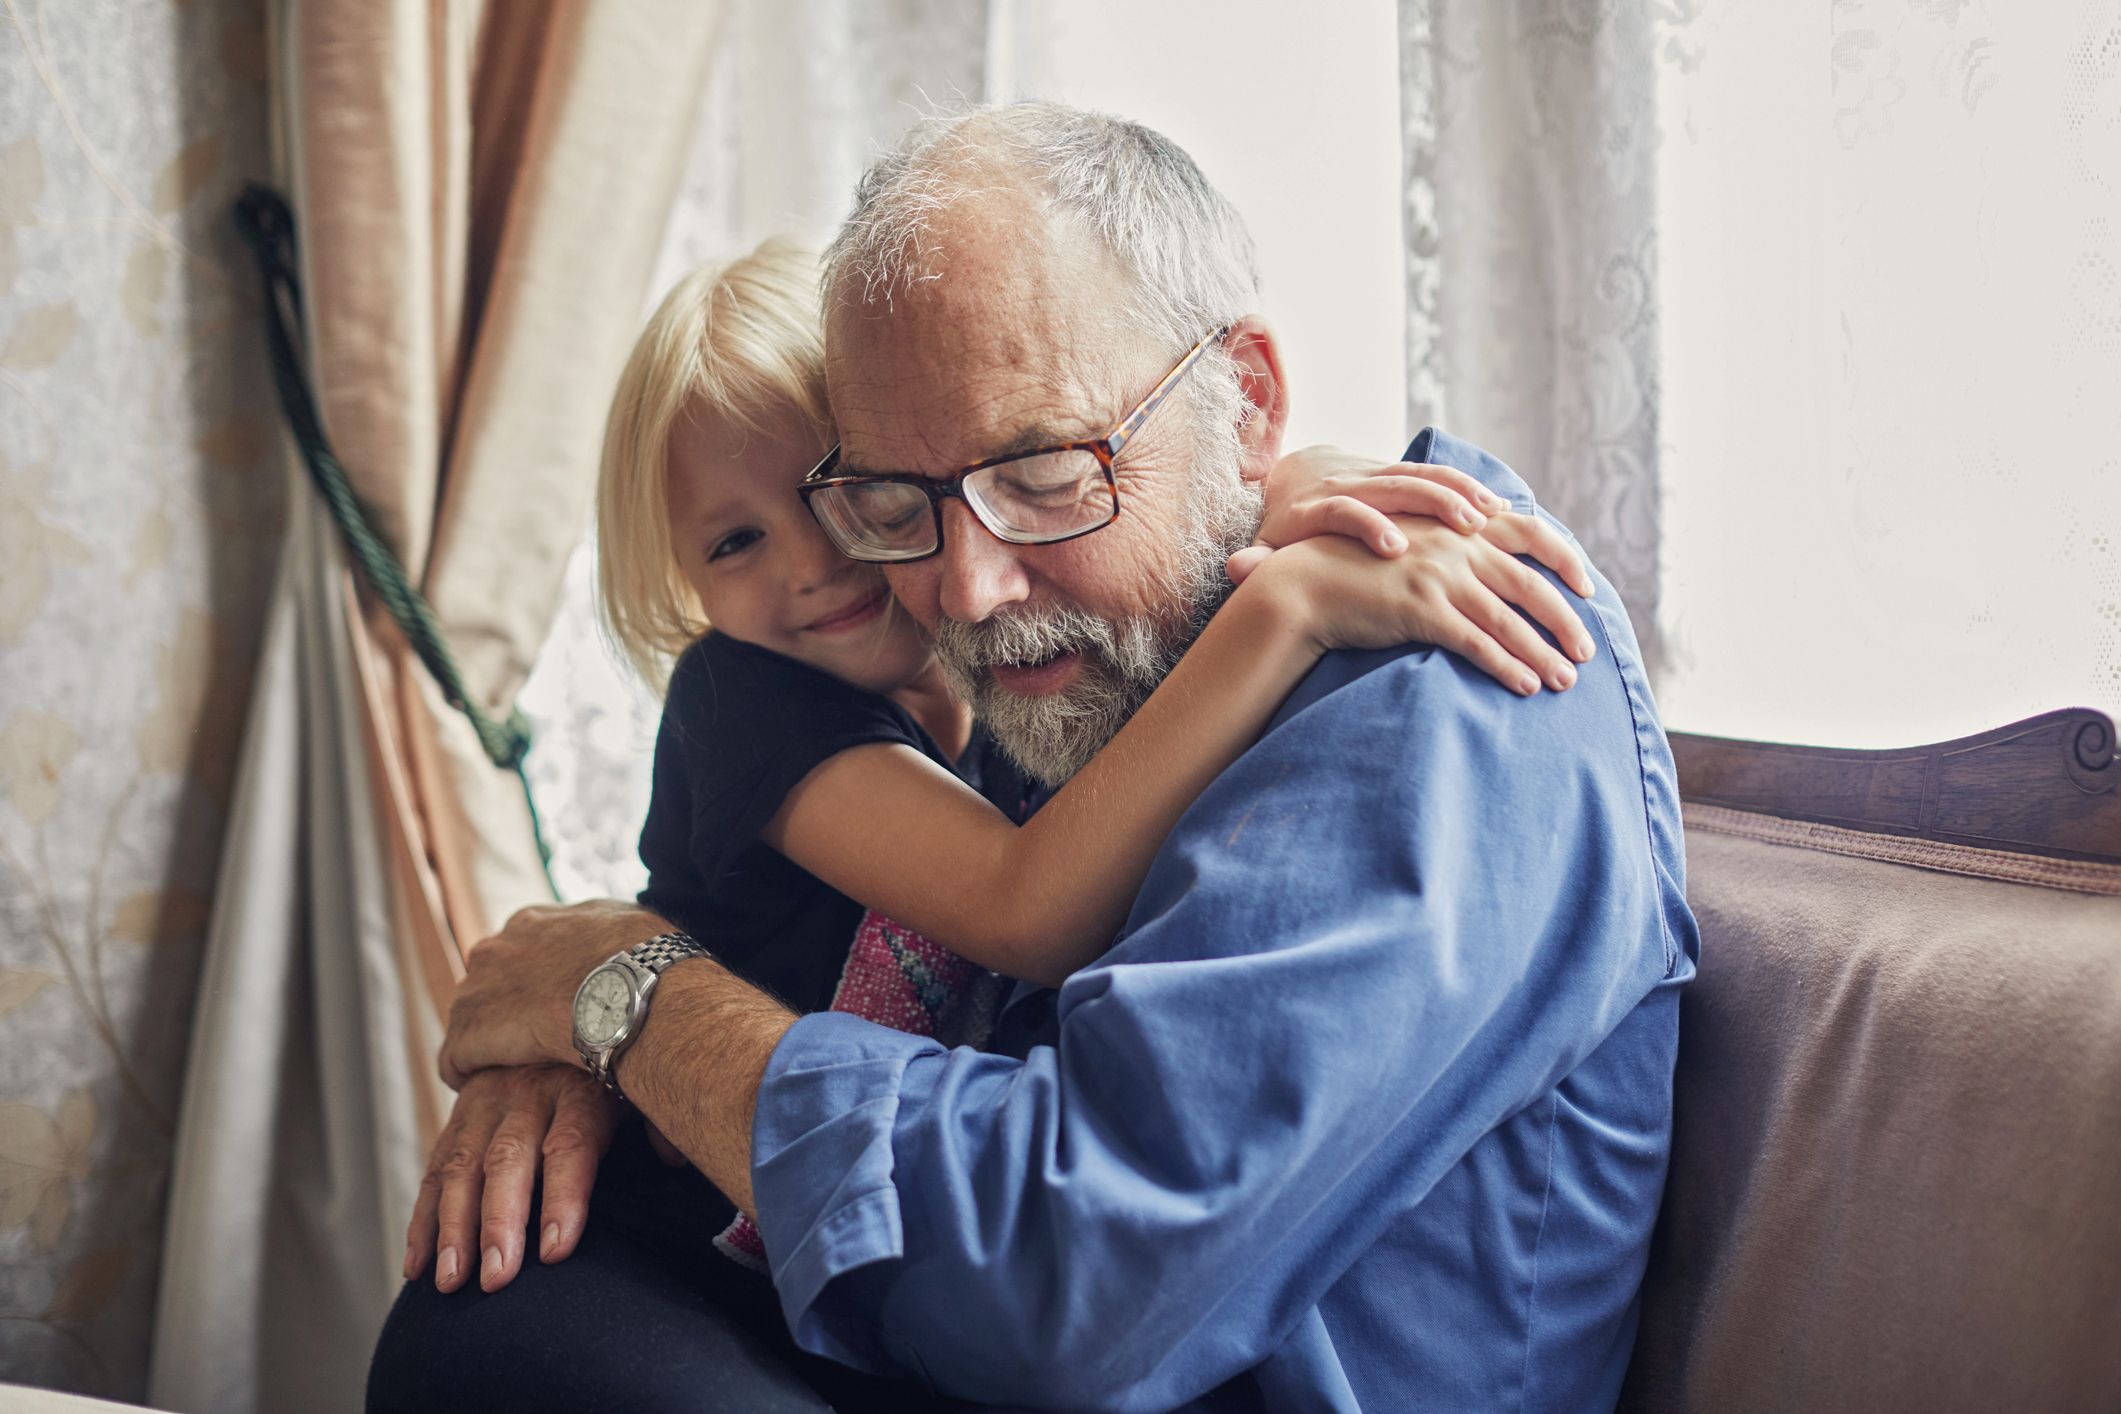 A grandfather hugging his grandson. | Source: Shutterstock